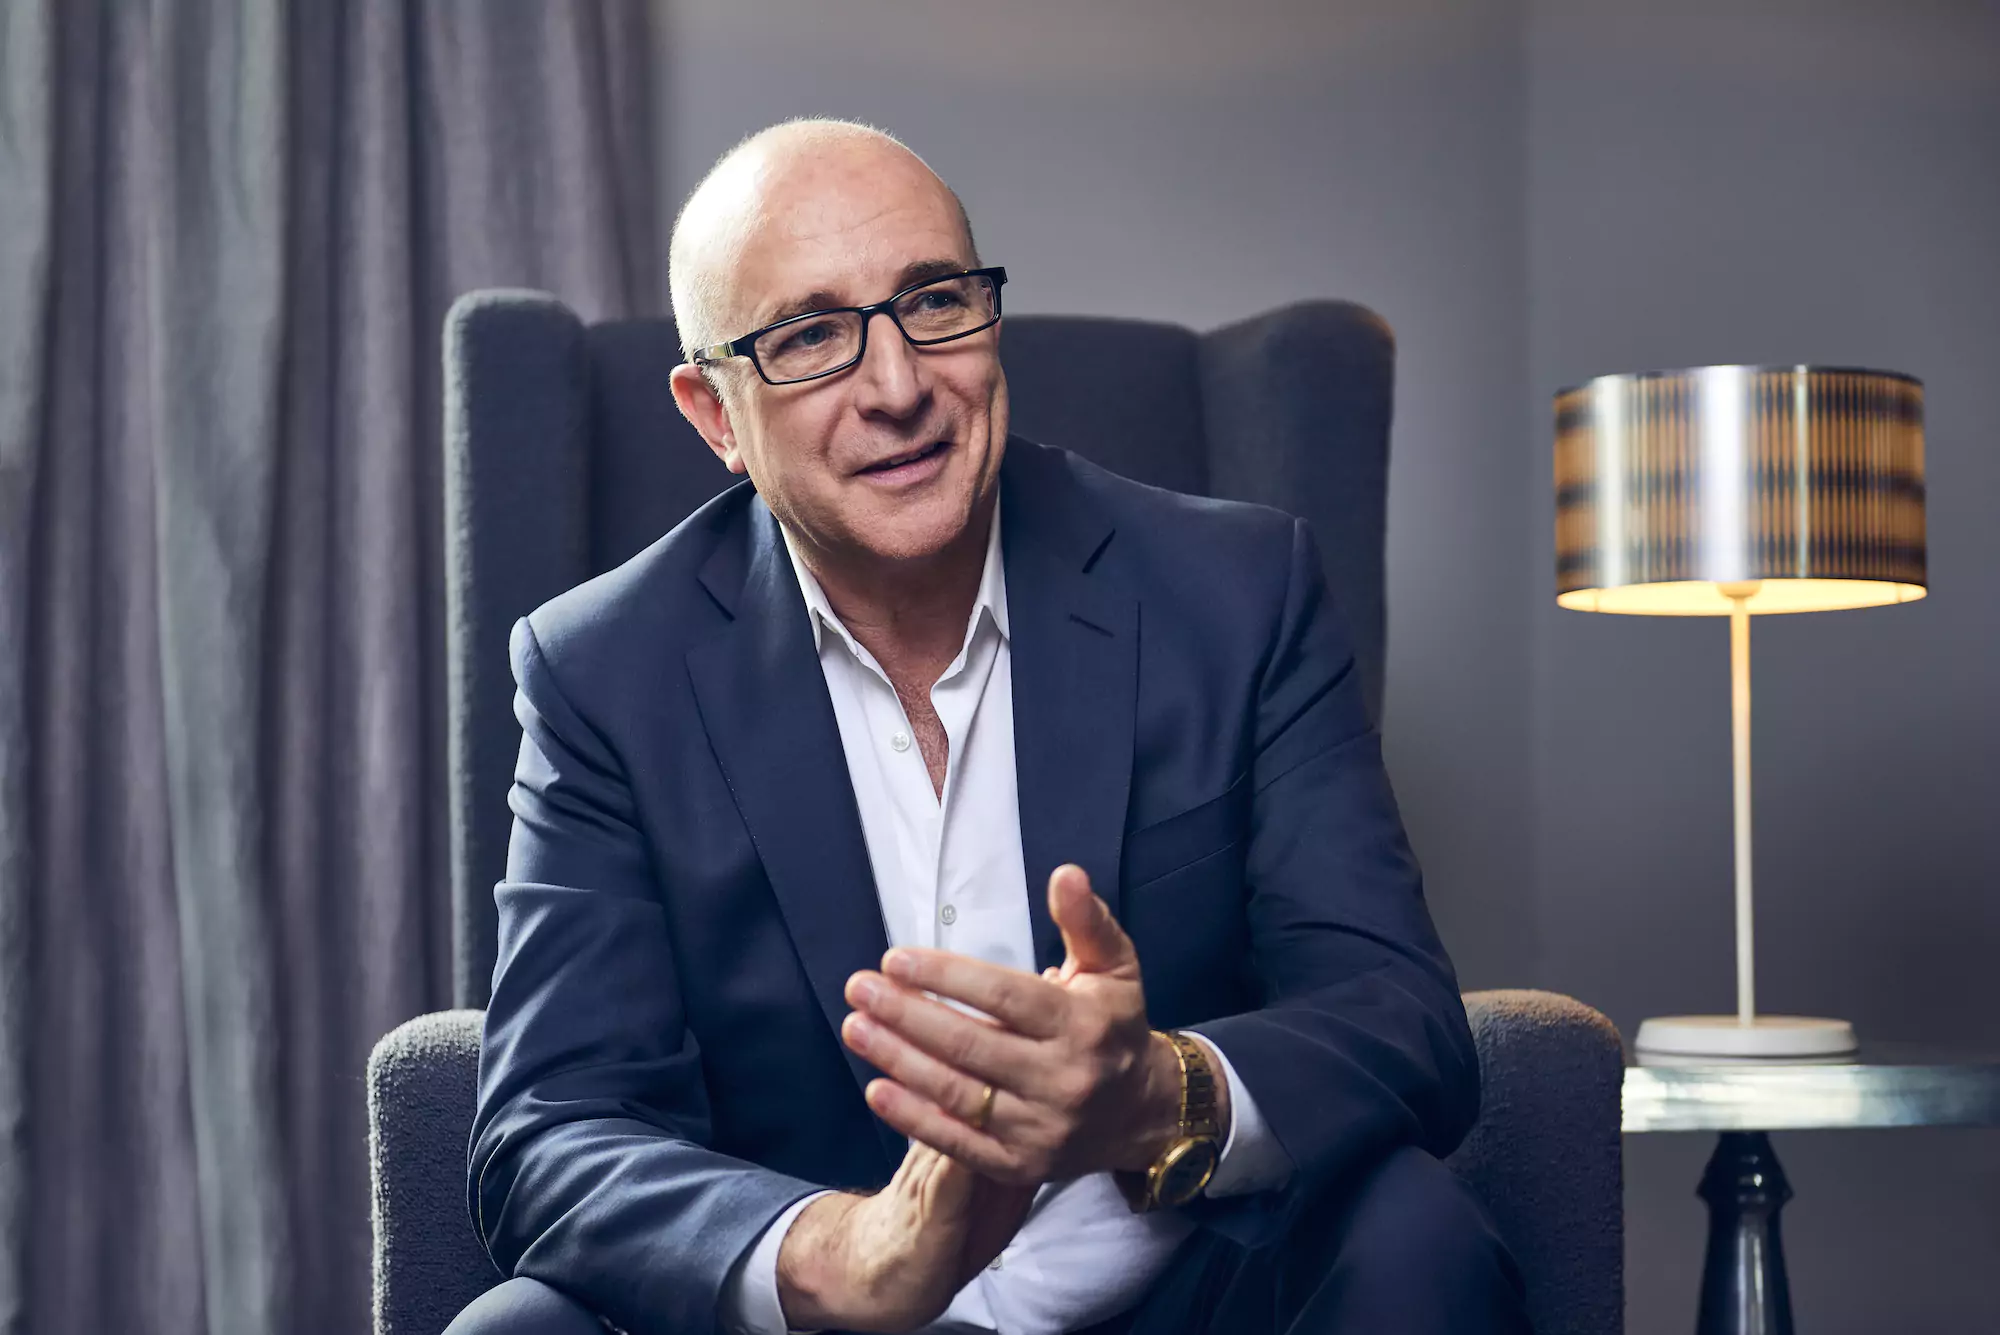 Paul McKenna, UK's #1 hypnotherapist and the trainer of the Mindvalley Certified Hypnotherapist program